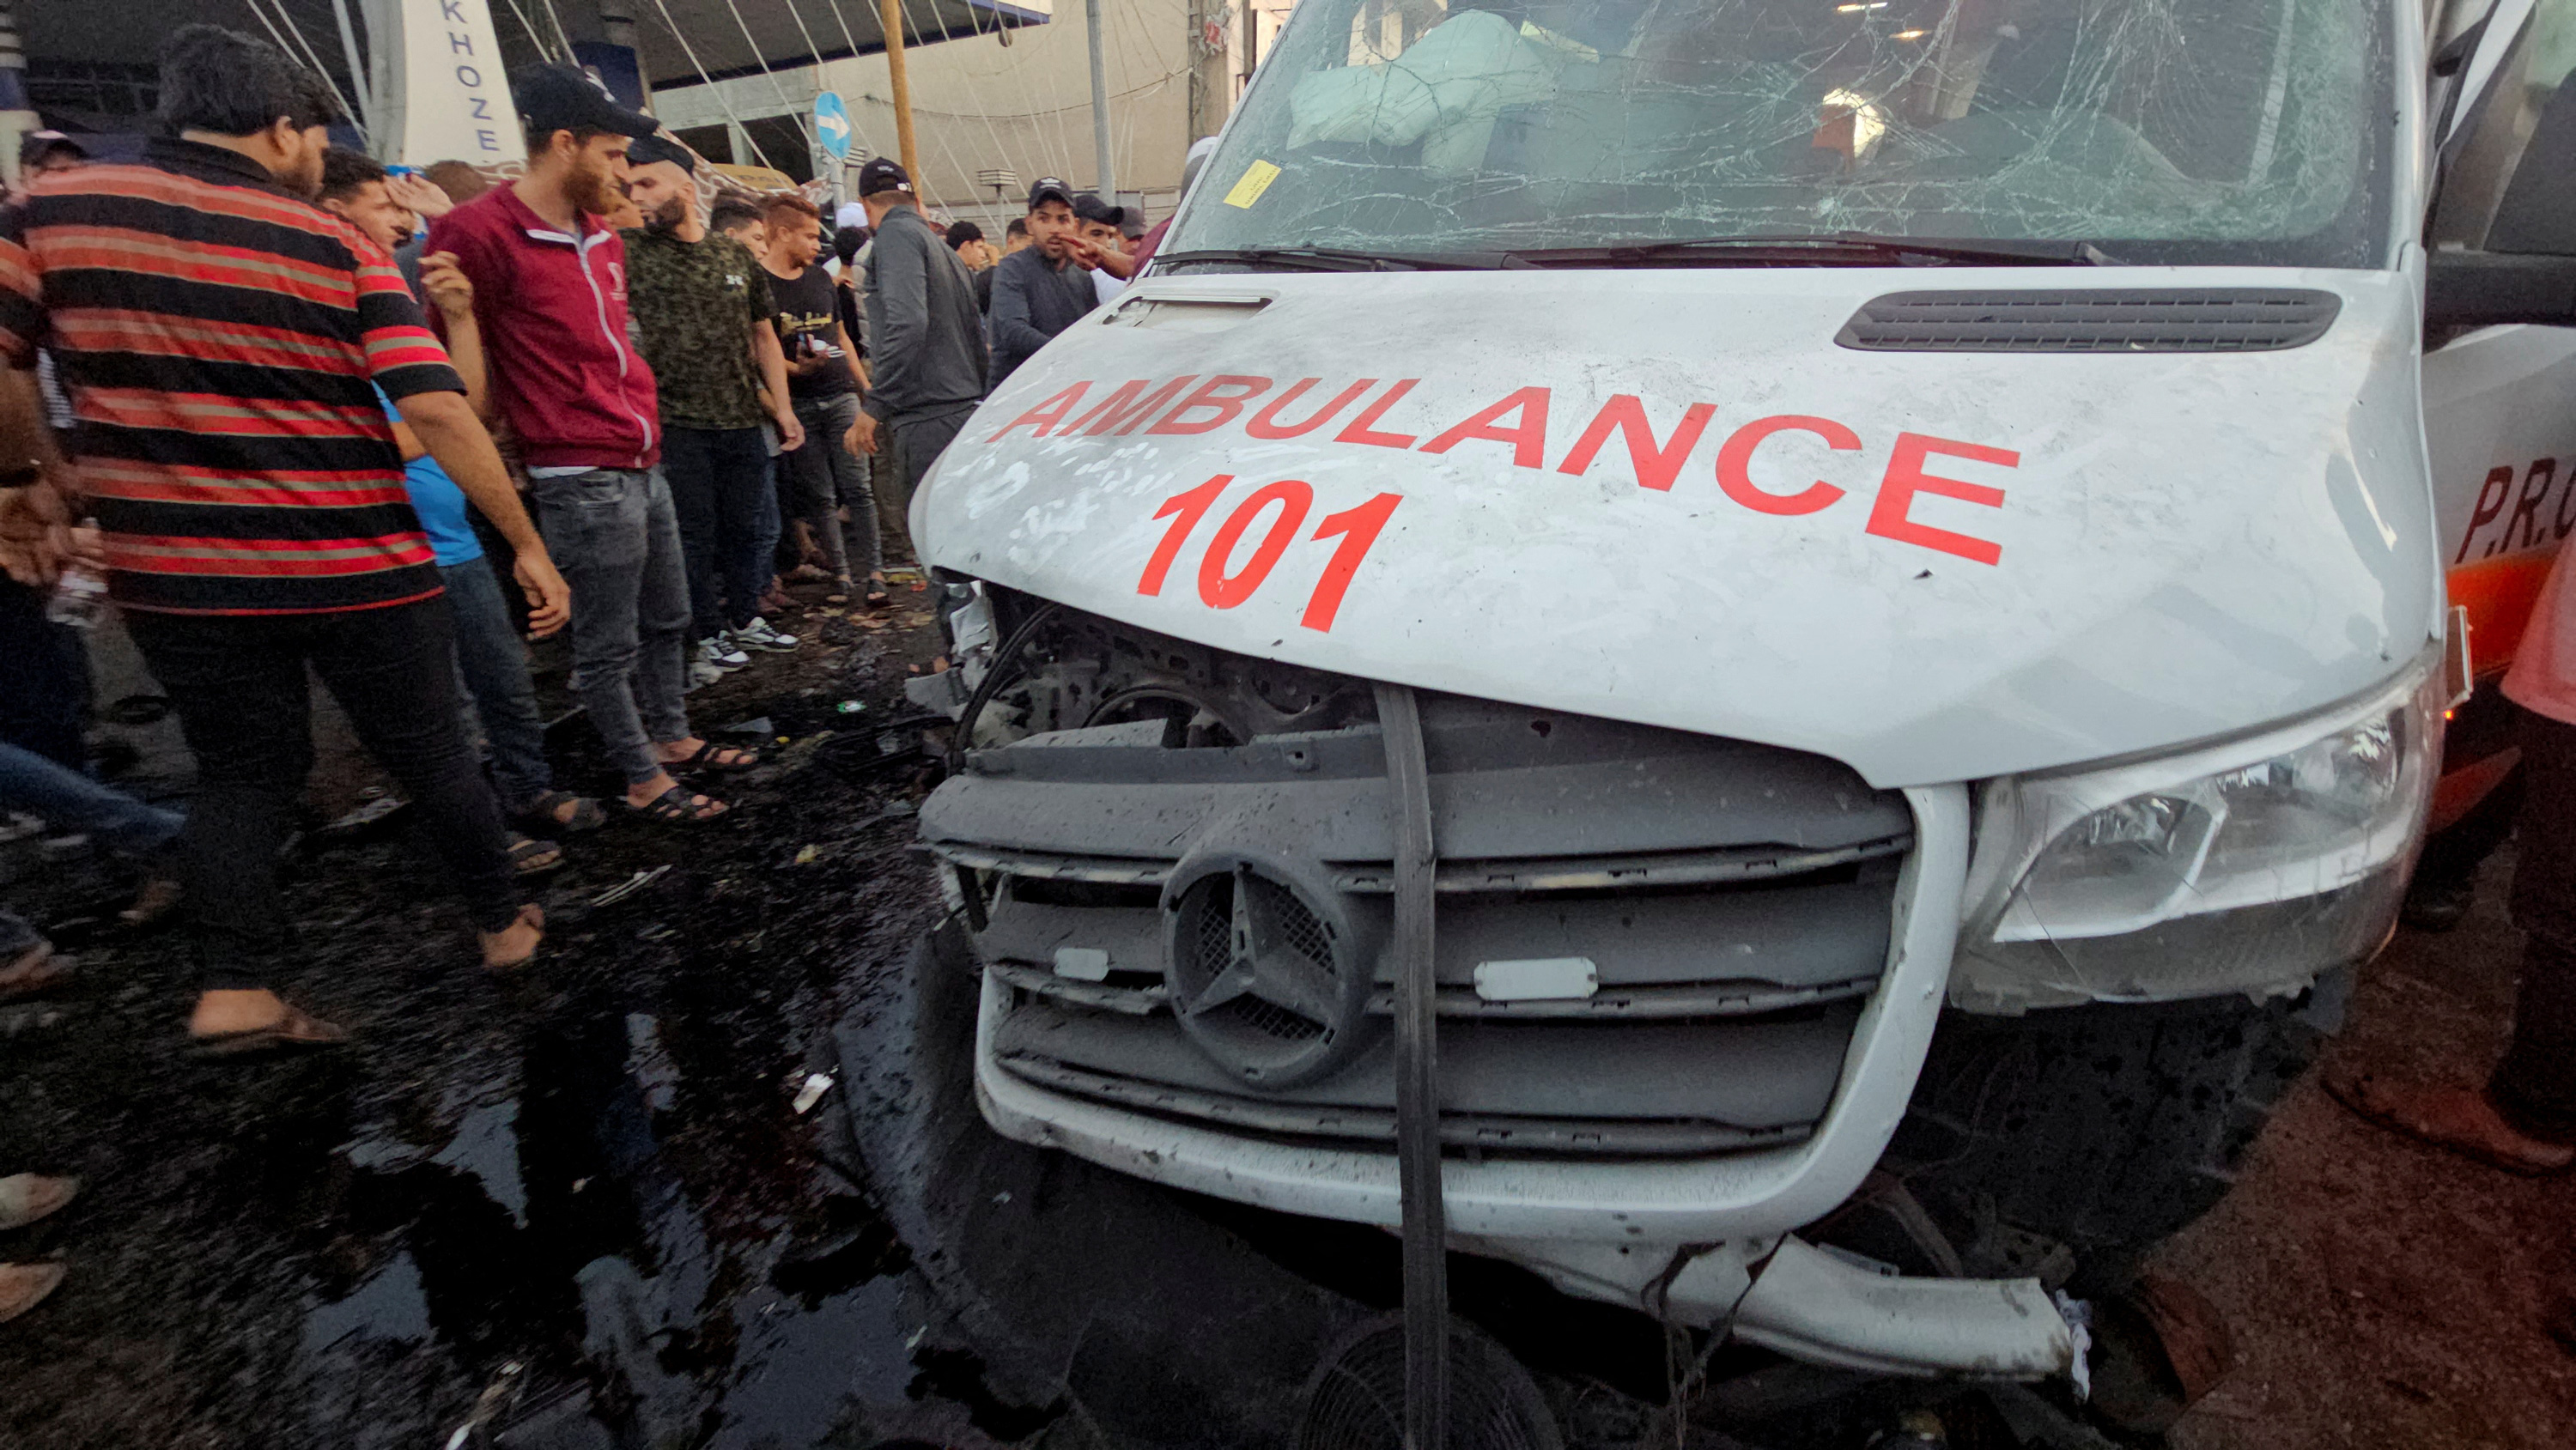 Palestinians check the damage on an ambulance after a convoy of ambulances was hit near the entrance of Al-Shifa hospital in Gaza City.